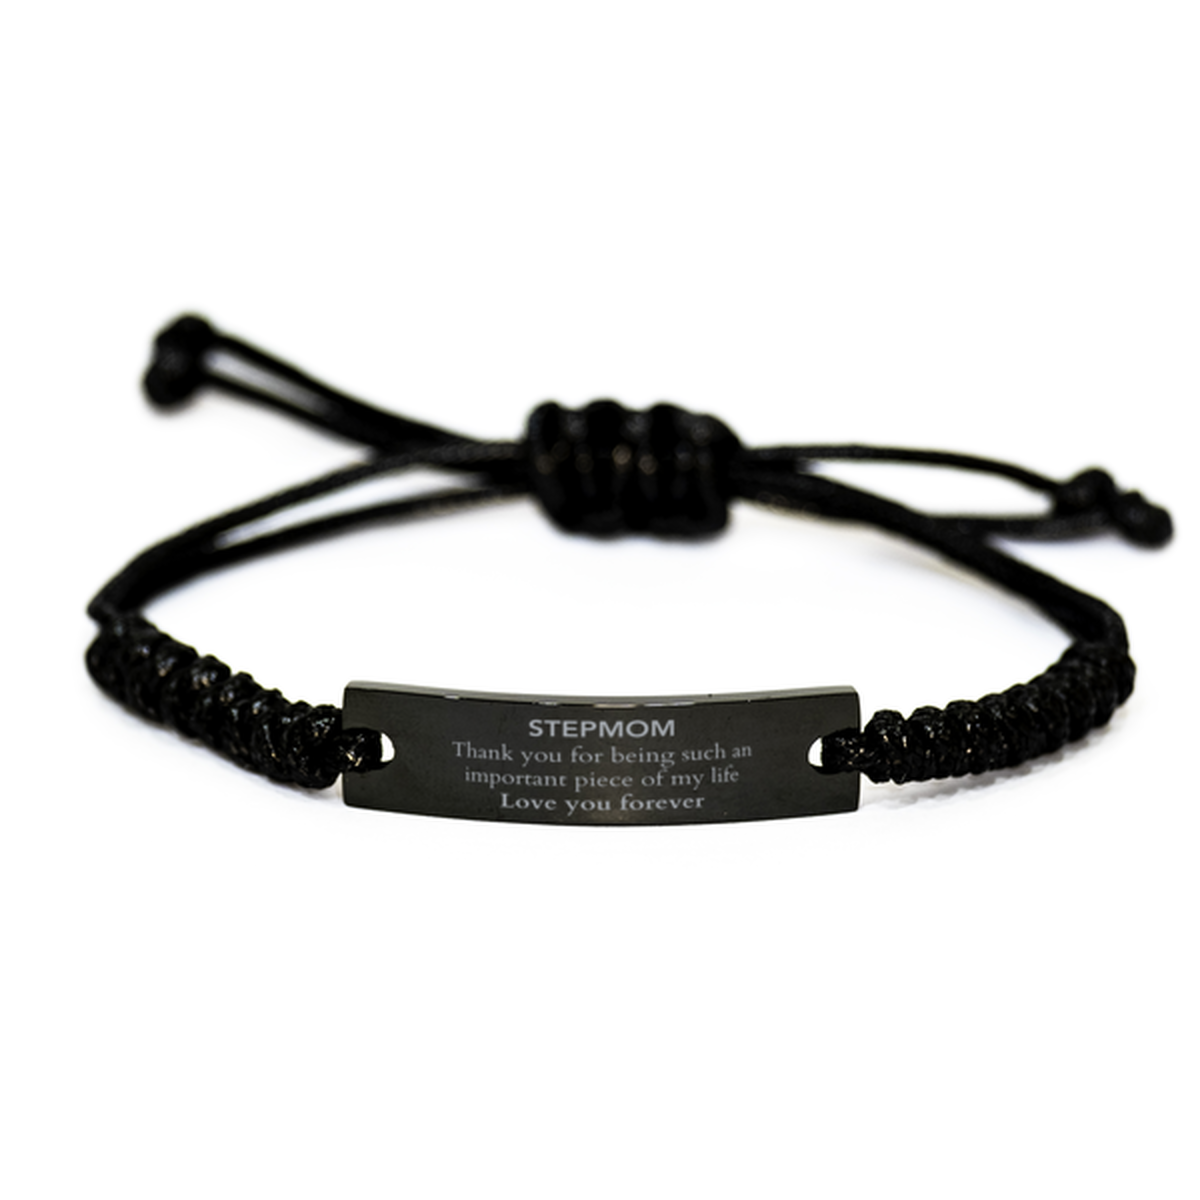 Appropriate Stepmom Black Rope Bracelet Epic Birthday Gifts for Stepmom Thank you for being such an important piece of my life Stepmom Christmas Mothers Fathers Day